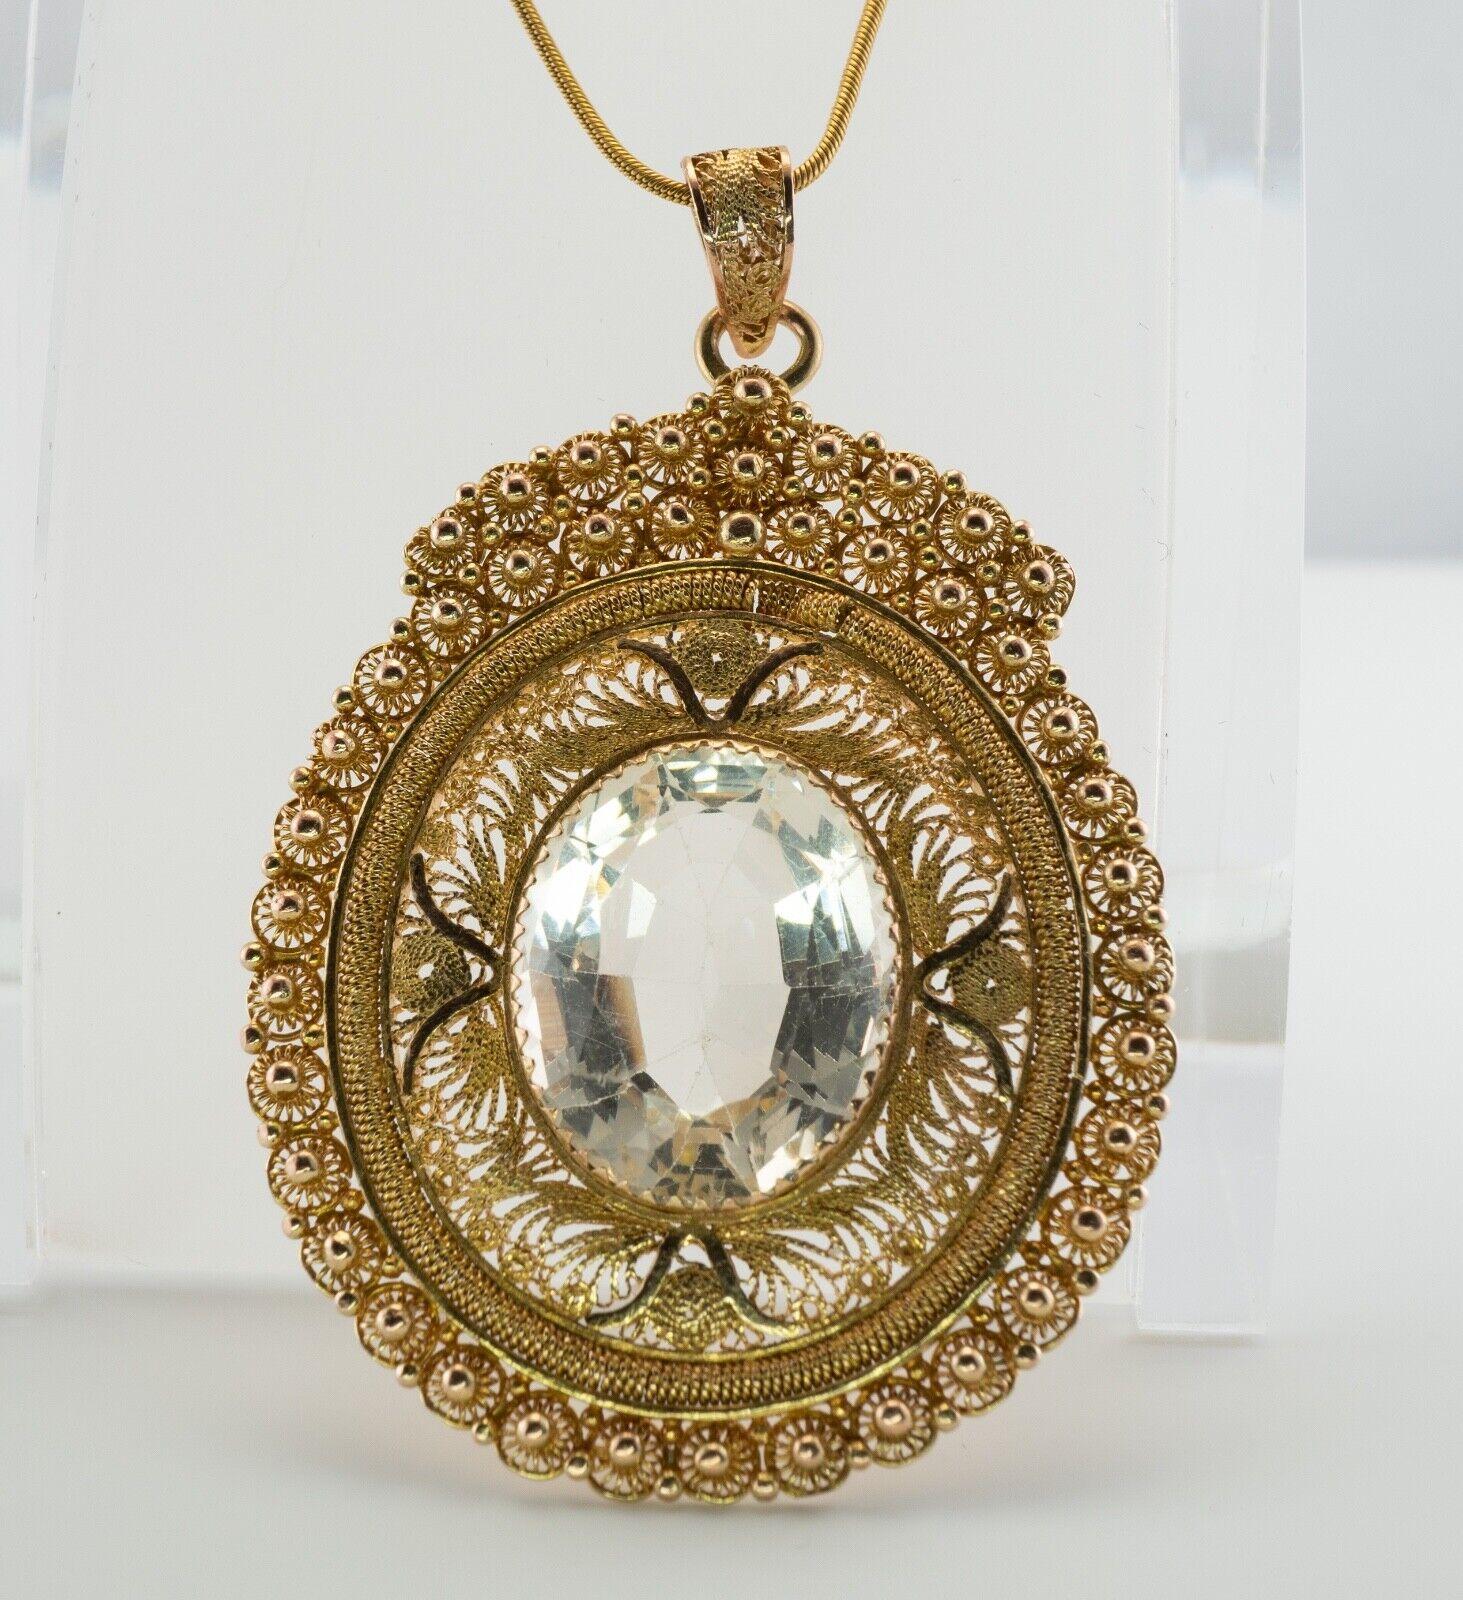 White Beryl Large Pendant 14K Gold Vintage

This one of a kind vintage pendant is finely crafted in solid 14K Yellow gold (carefully tested and guaranteed). The center stunning stone measures 20x16mm. We're not sure what stone it is, but we